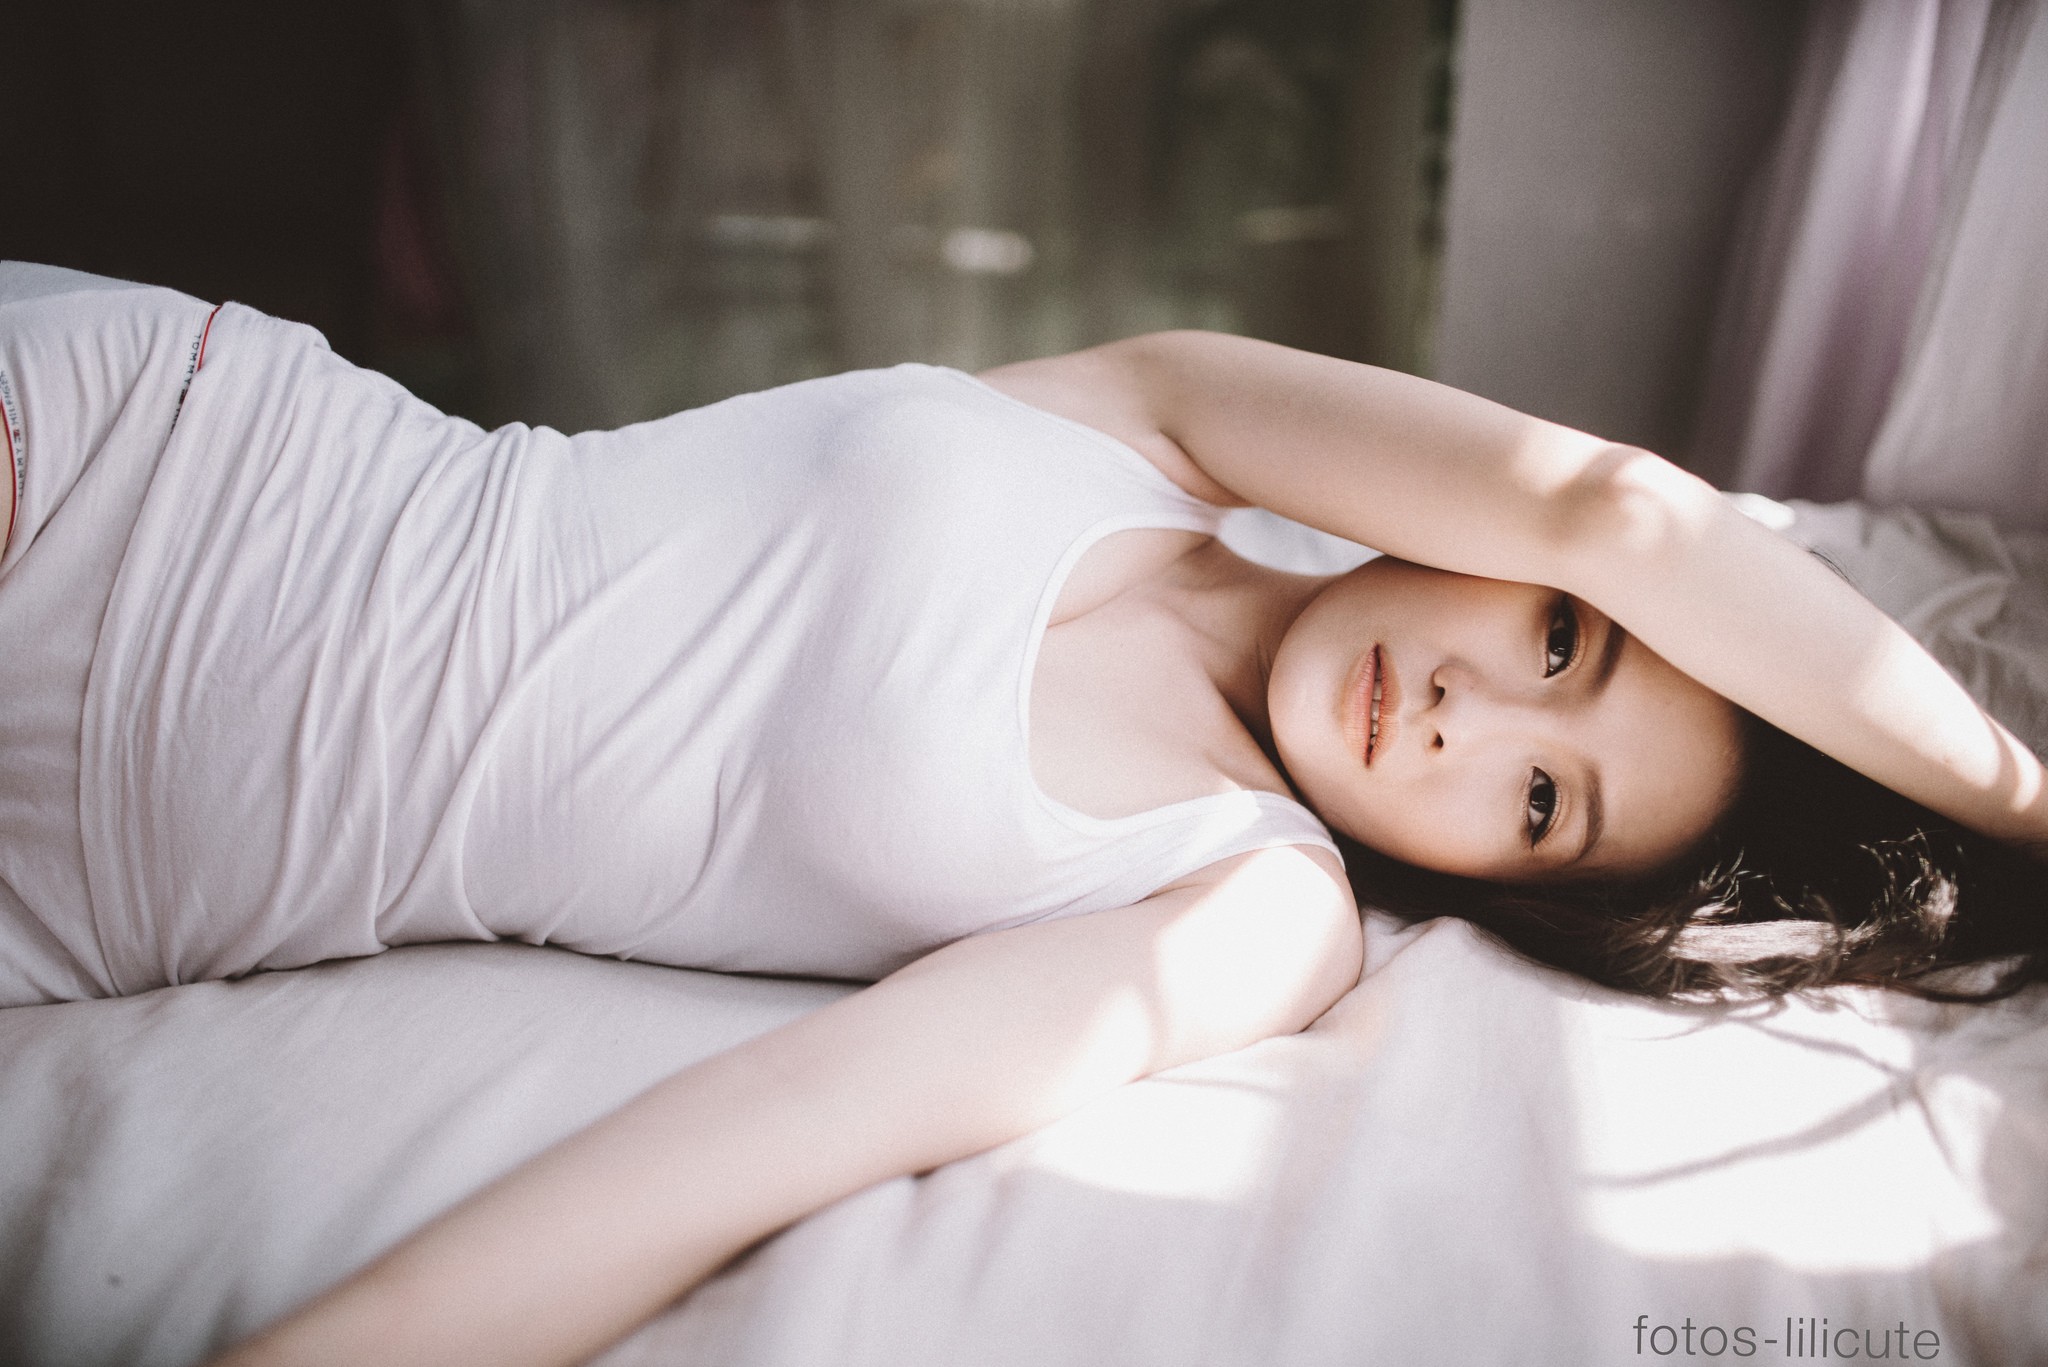 People 2048x1367 women Asian brunette lying on side in bed arms up tank top